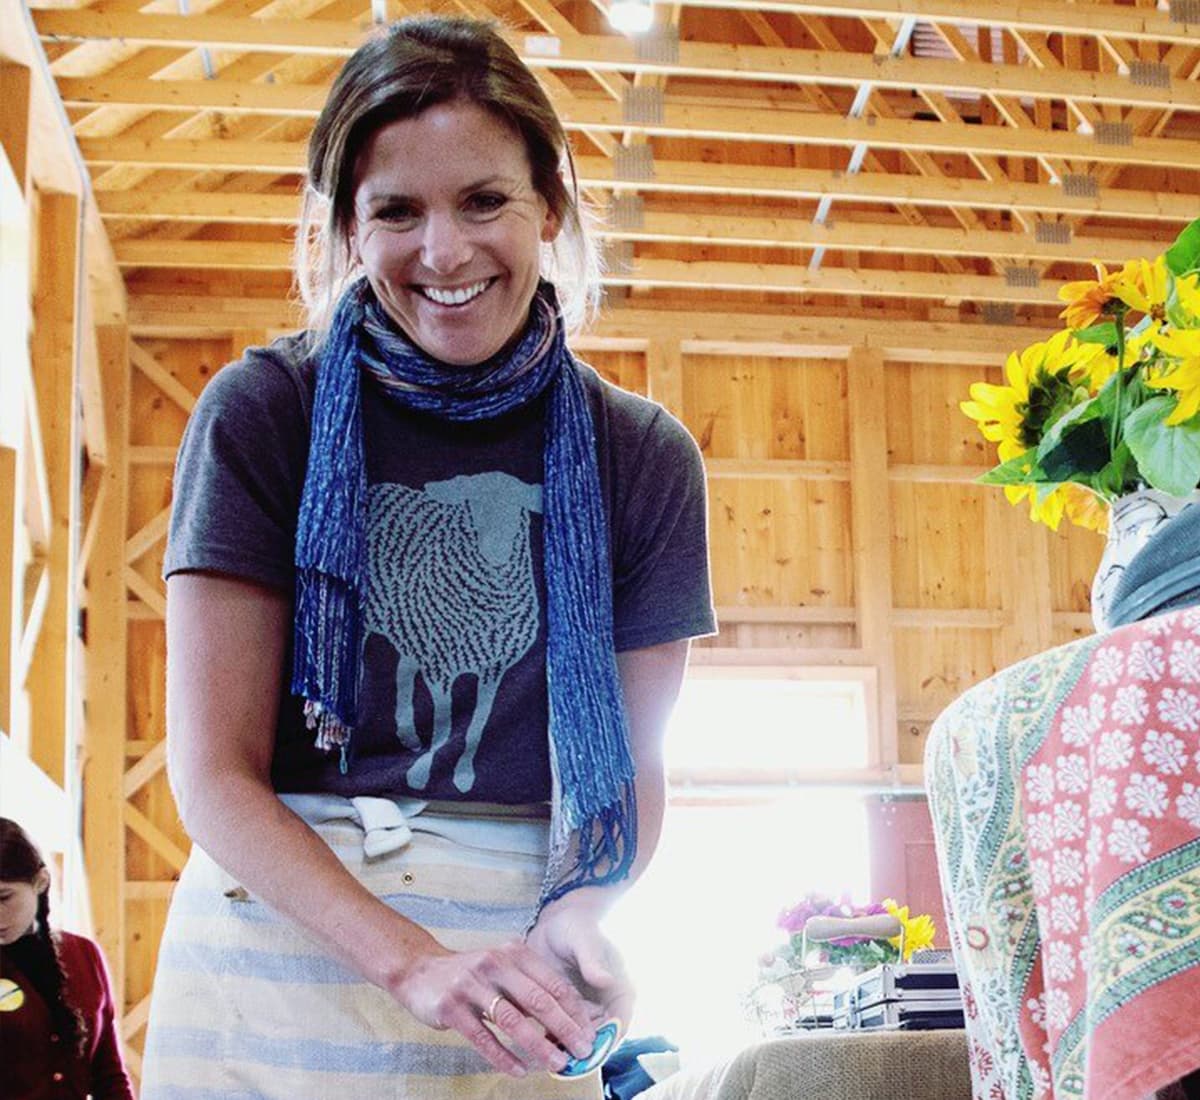 A woman with a blue t-shirt and scarf cutting pieces of cheese in a wooden barn-like structure